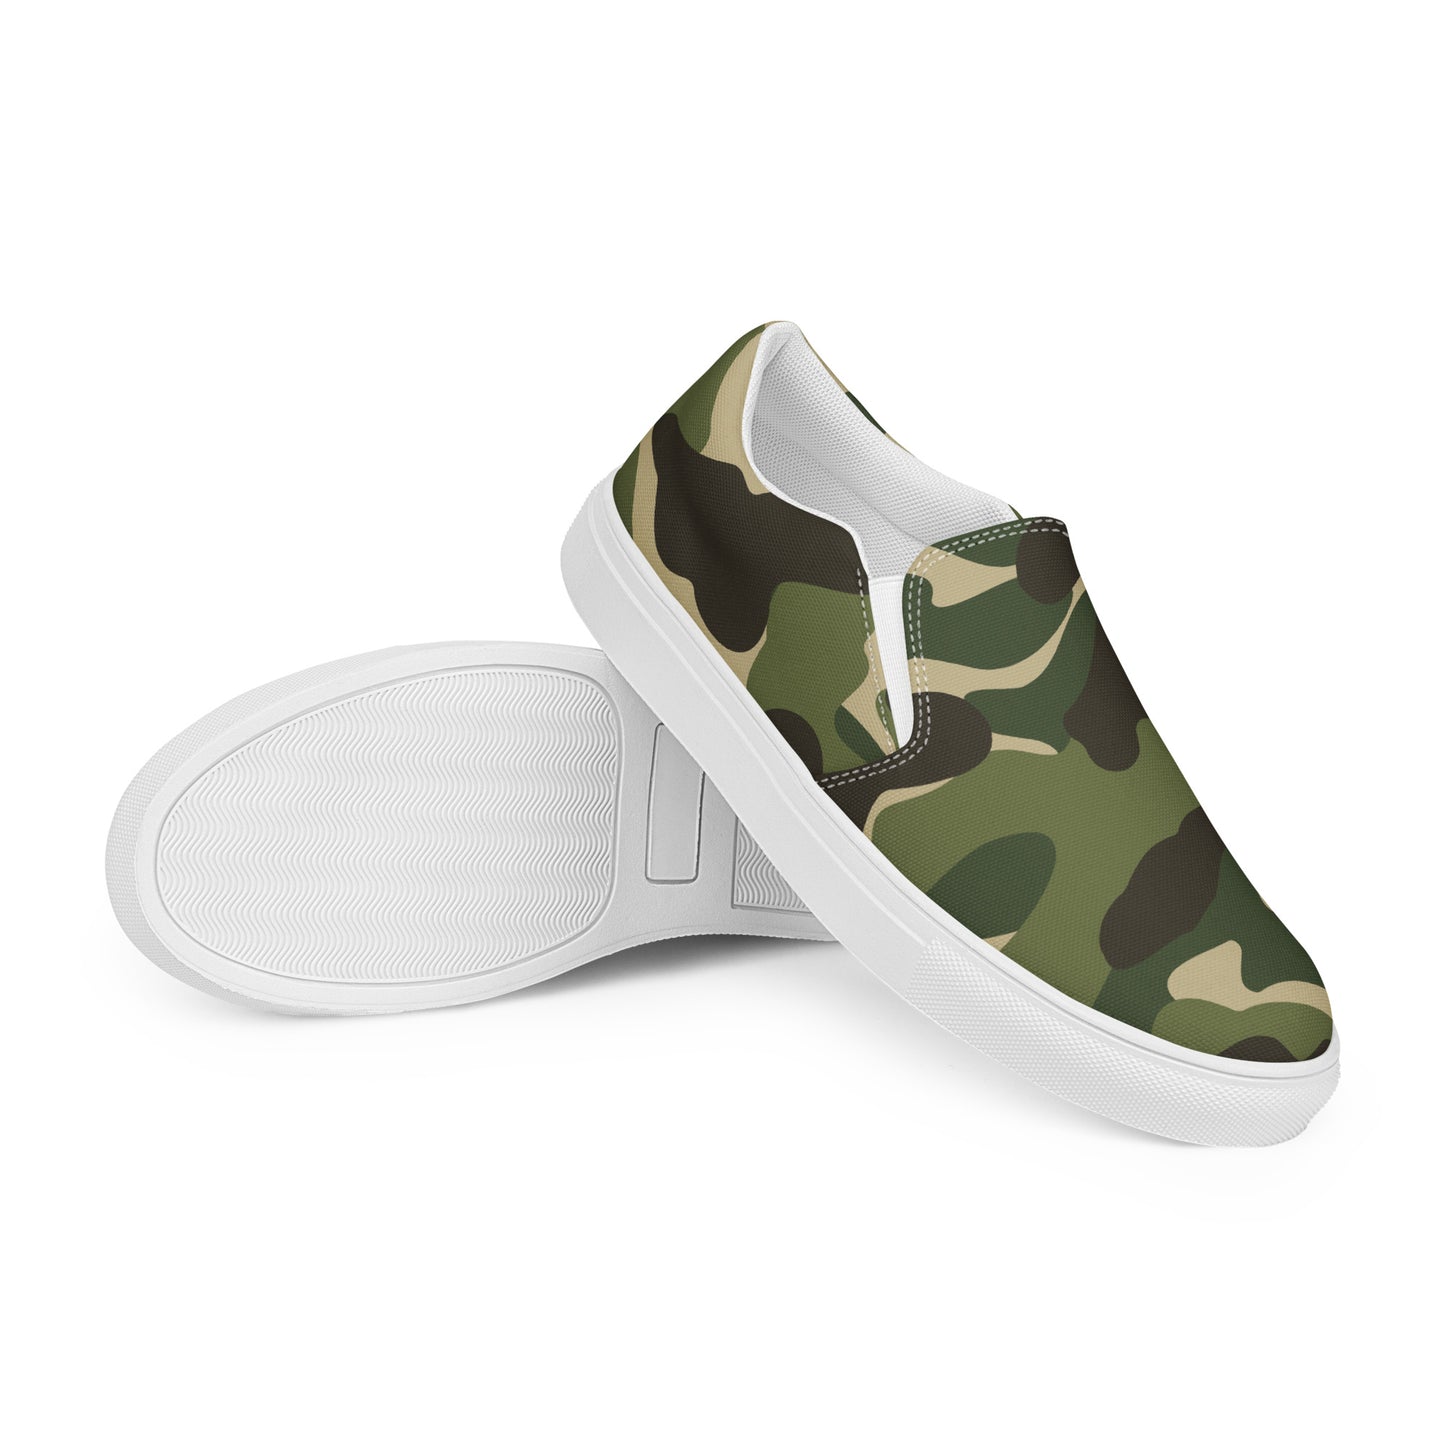 Army - Sustainably Made Men’s slip-on canvas shoes